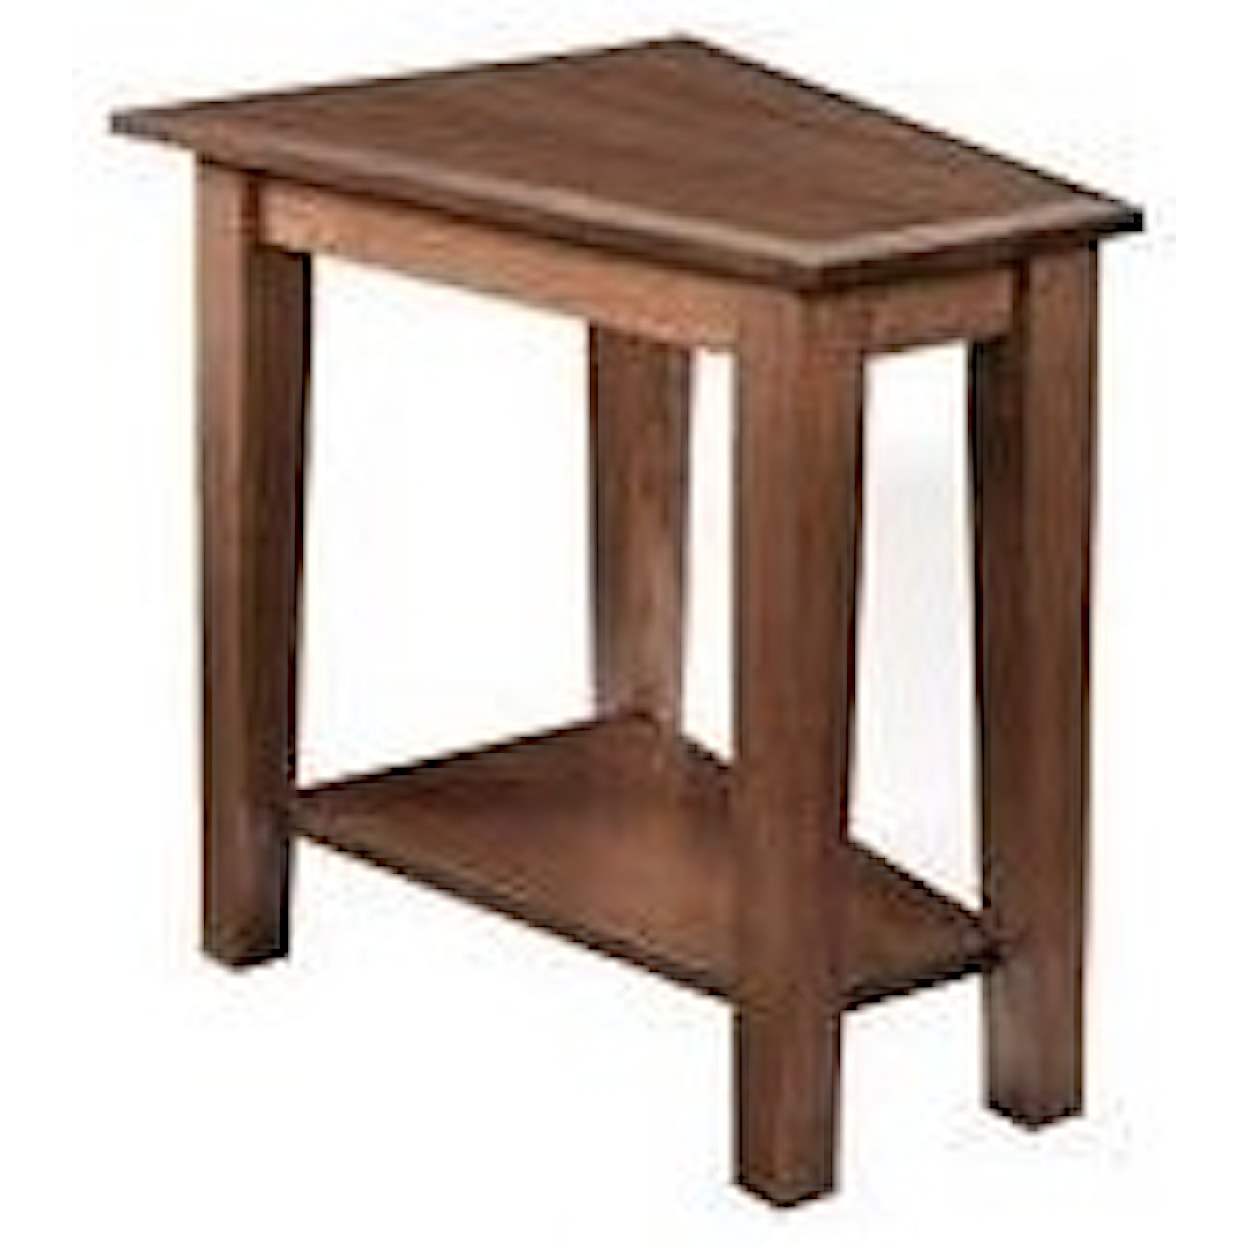 Hopewood Deluxe Shaker Wedge End Table